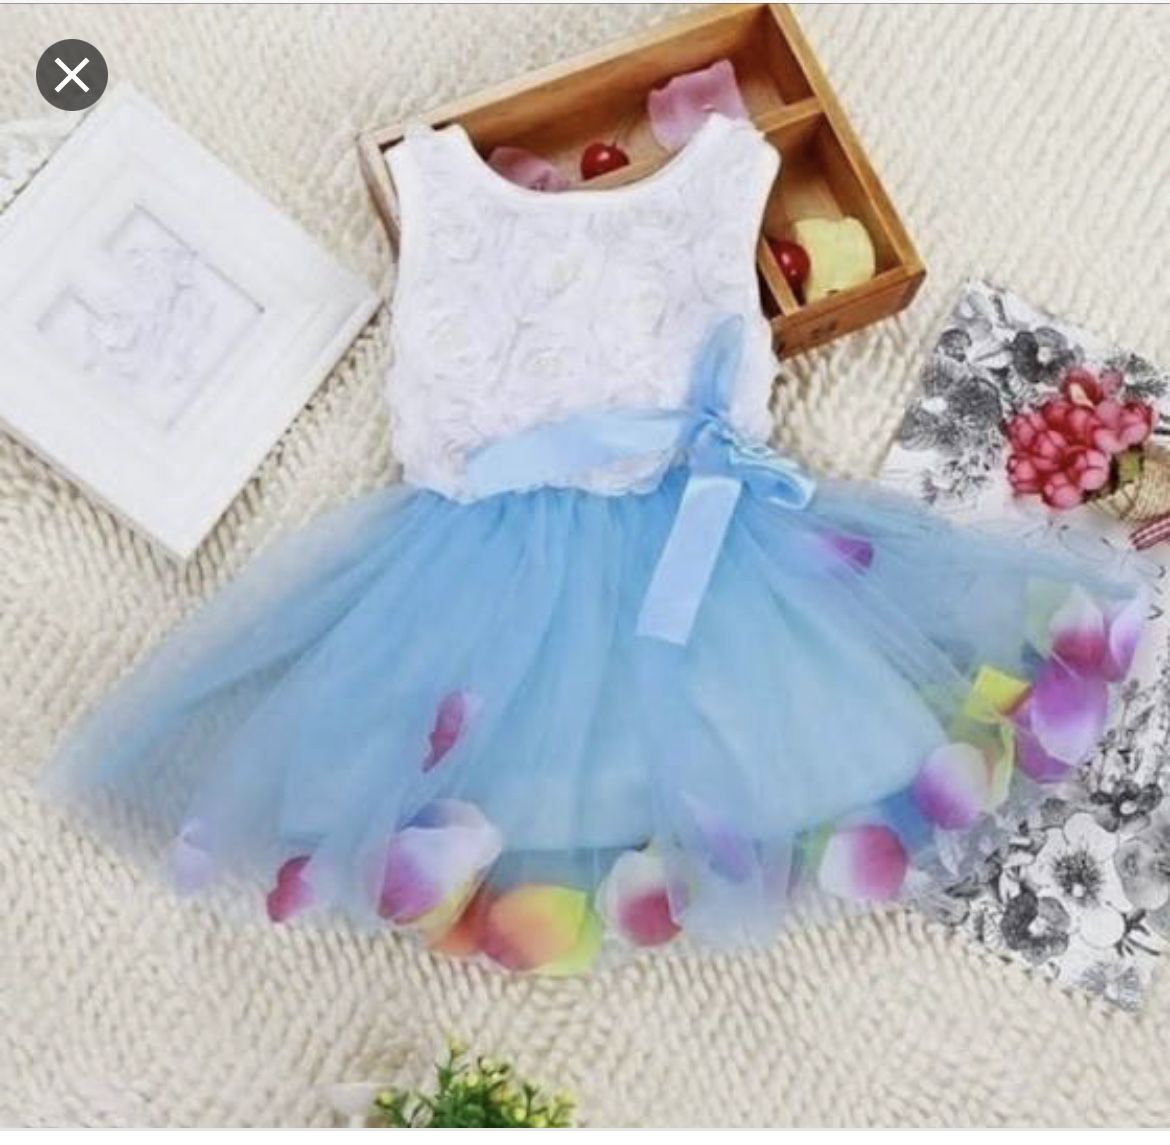 NEW Spunky Kids size 12 months to 2t, white formal dress with pearls tulle skirt petals flowers